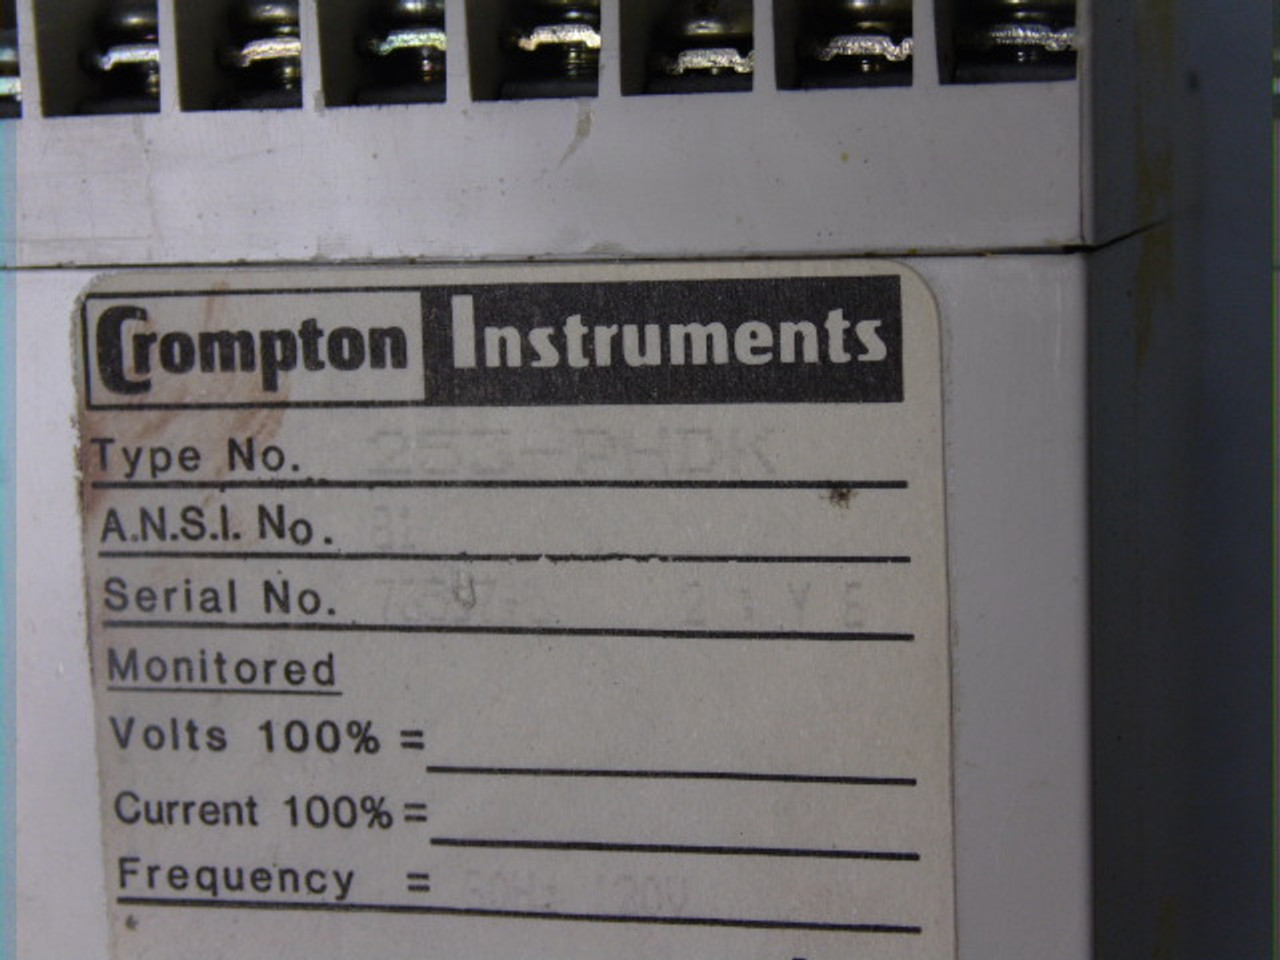 Crompton Instruments 253-PHDK Over/Under Relay 250mA Max Input USED